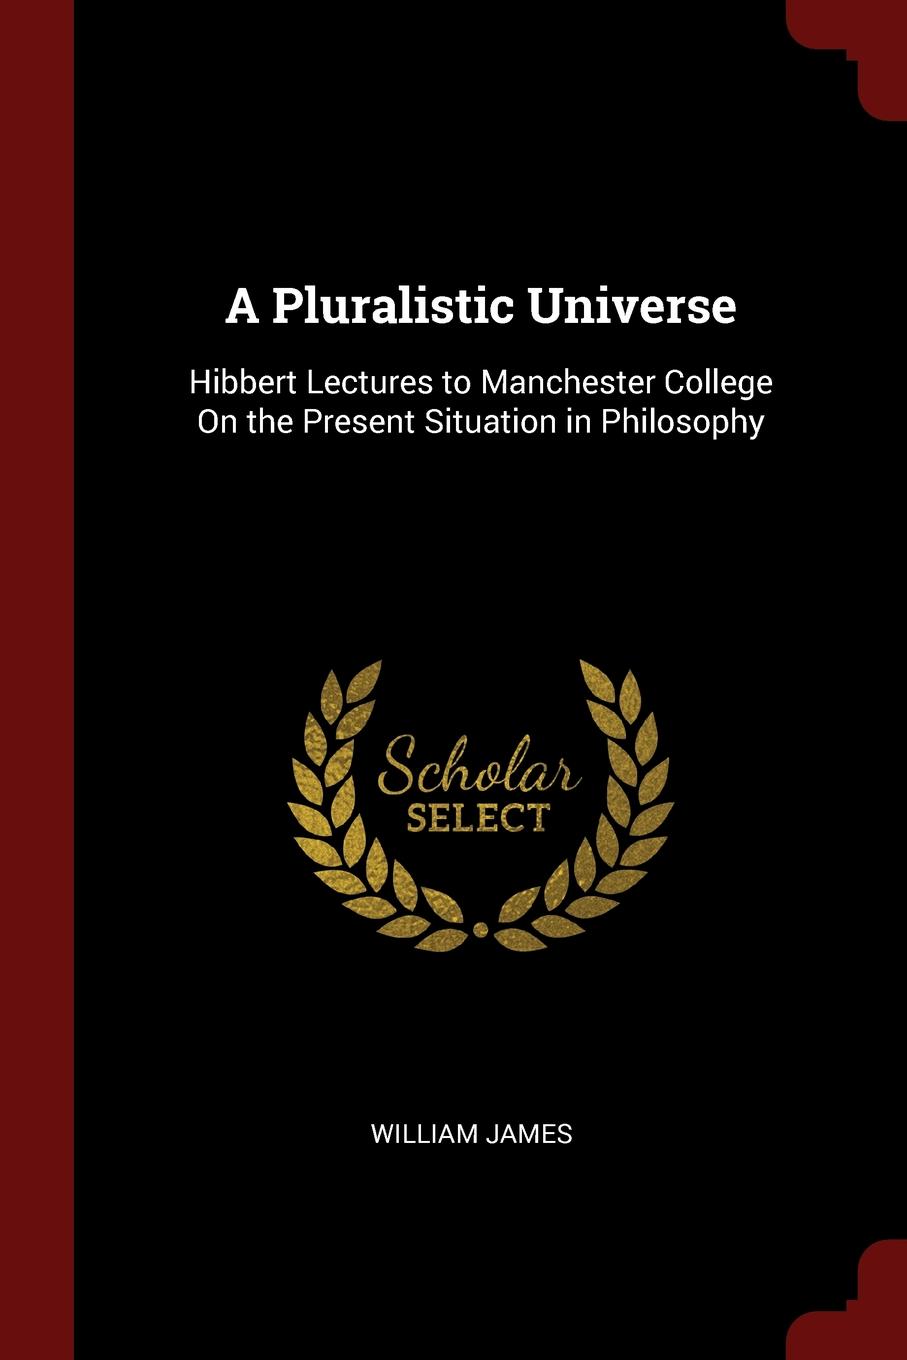 A Pluralistic Universe. Hibbert Lectures to Manchester College On the Present Situation in Philosophy